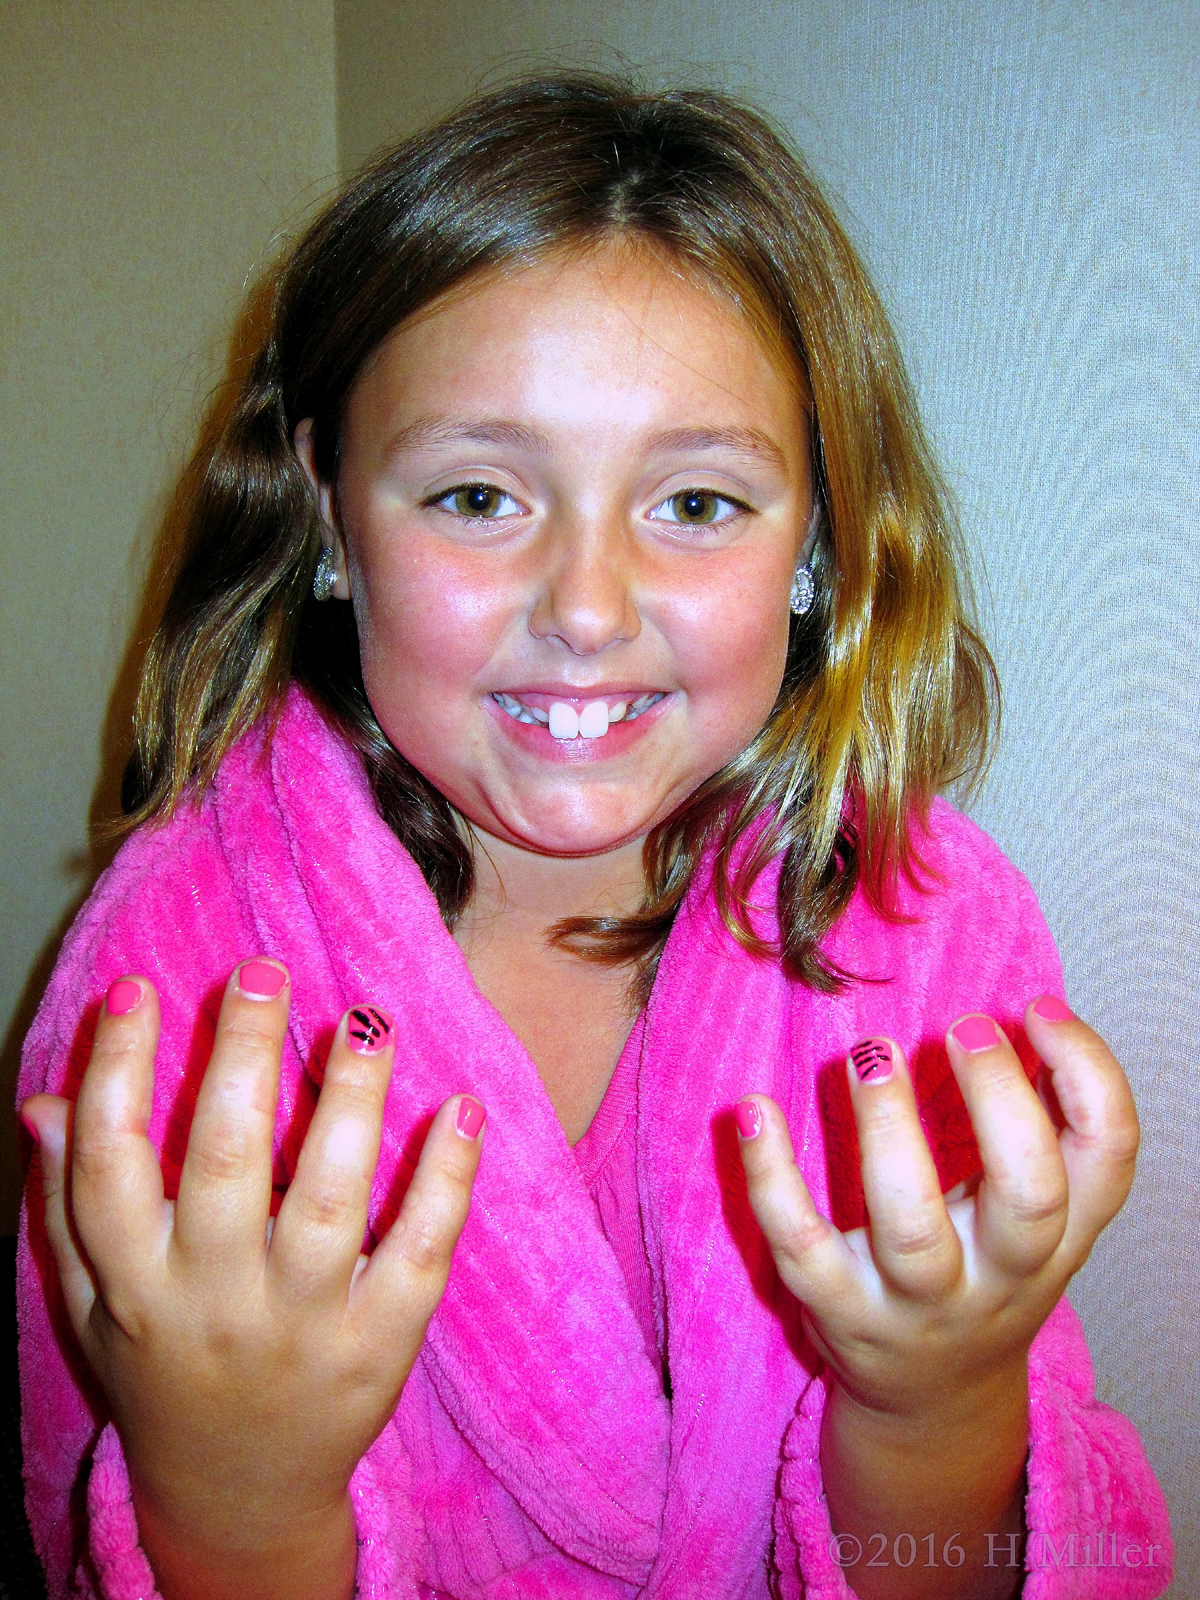 She Loves Her Awesome Pink Manicure! 